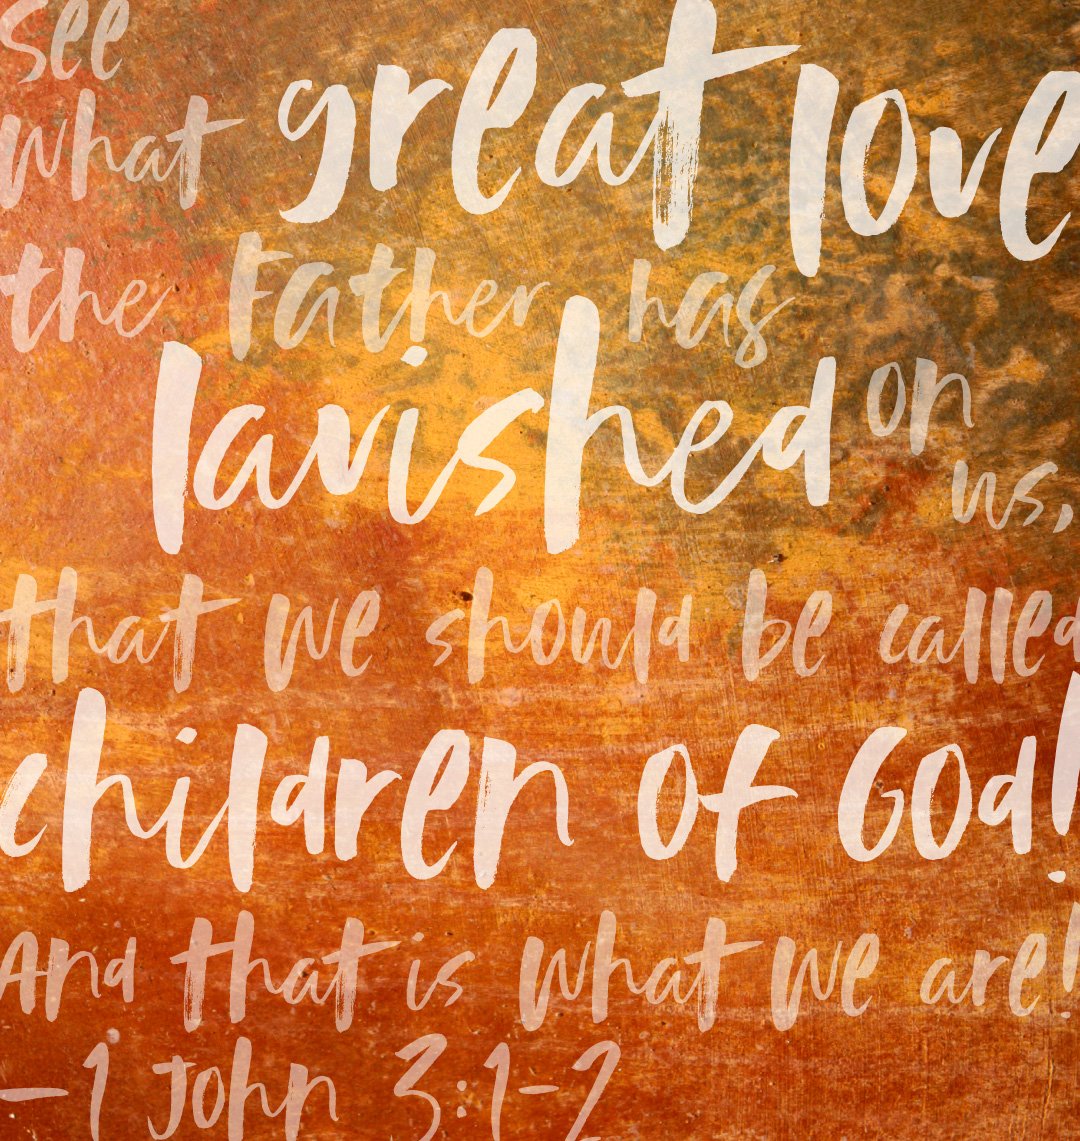 Wheaton Bible Church on Twitter: &quot;See what great love the Father has lavished on us, that we should be called children of God! And that is what we are! 1 John 3:1-2